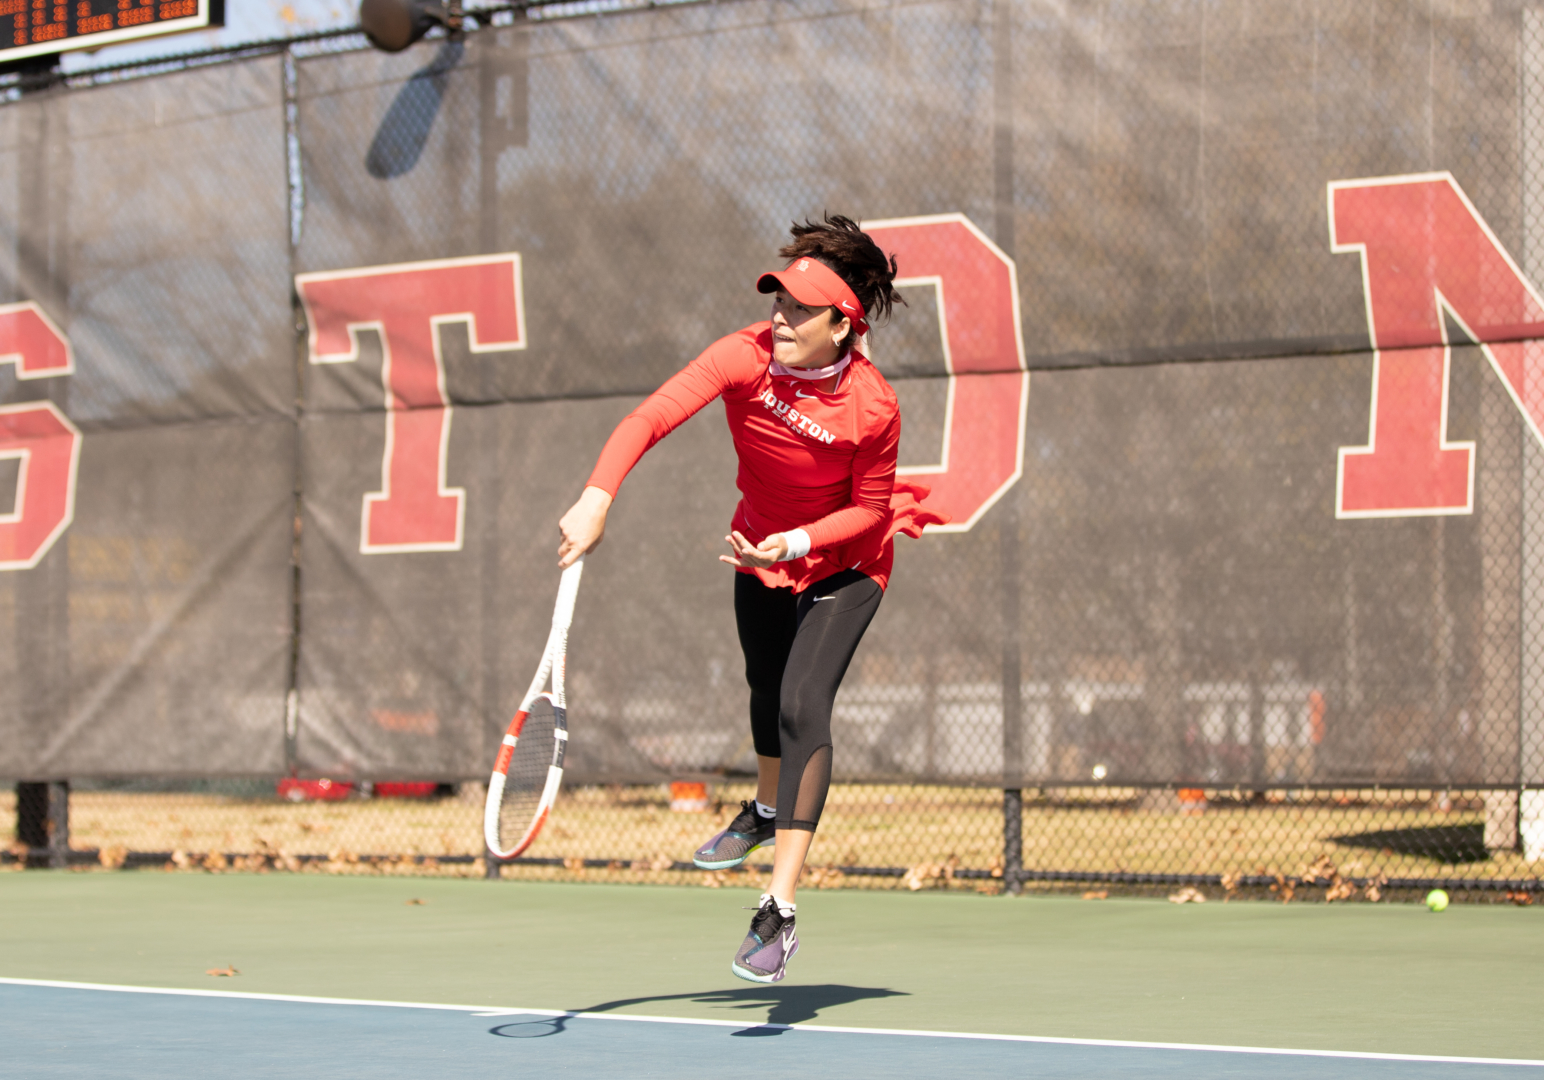 UH Tennis got its first win on the year in the Home Opener against Louisiana Monroe, defeating the Warhawks 5-2. | Sean Thomas/The Cougar